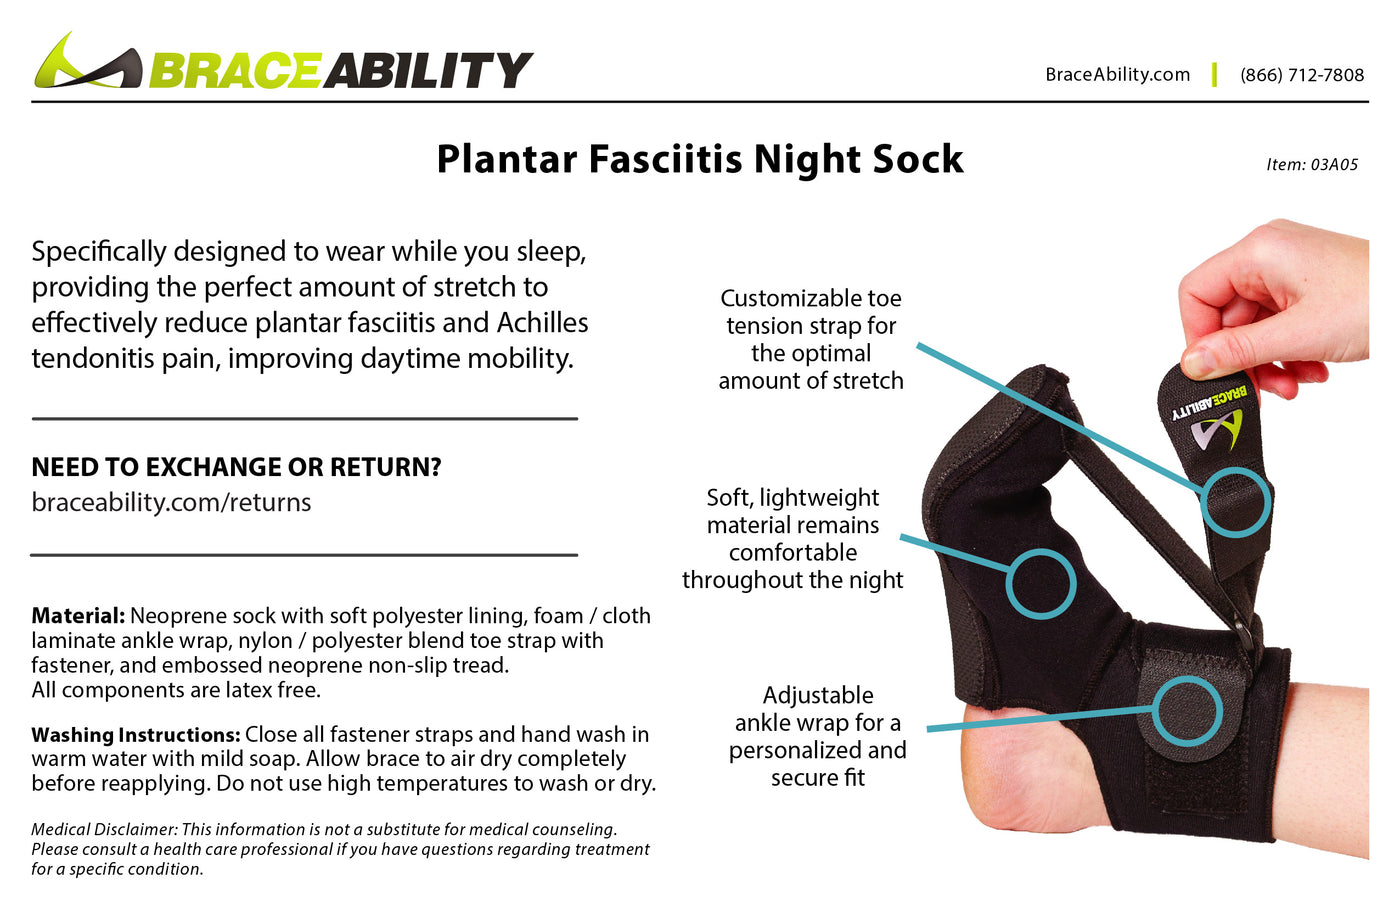 hand wash the plantar fasciitis night sock with warm water and mild detergent